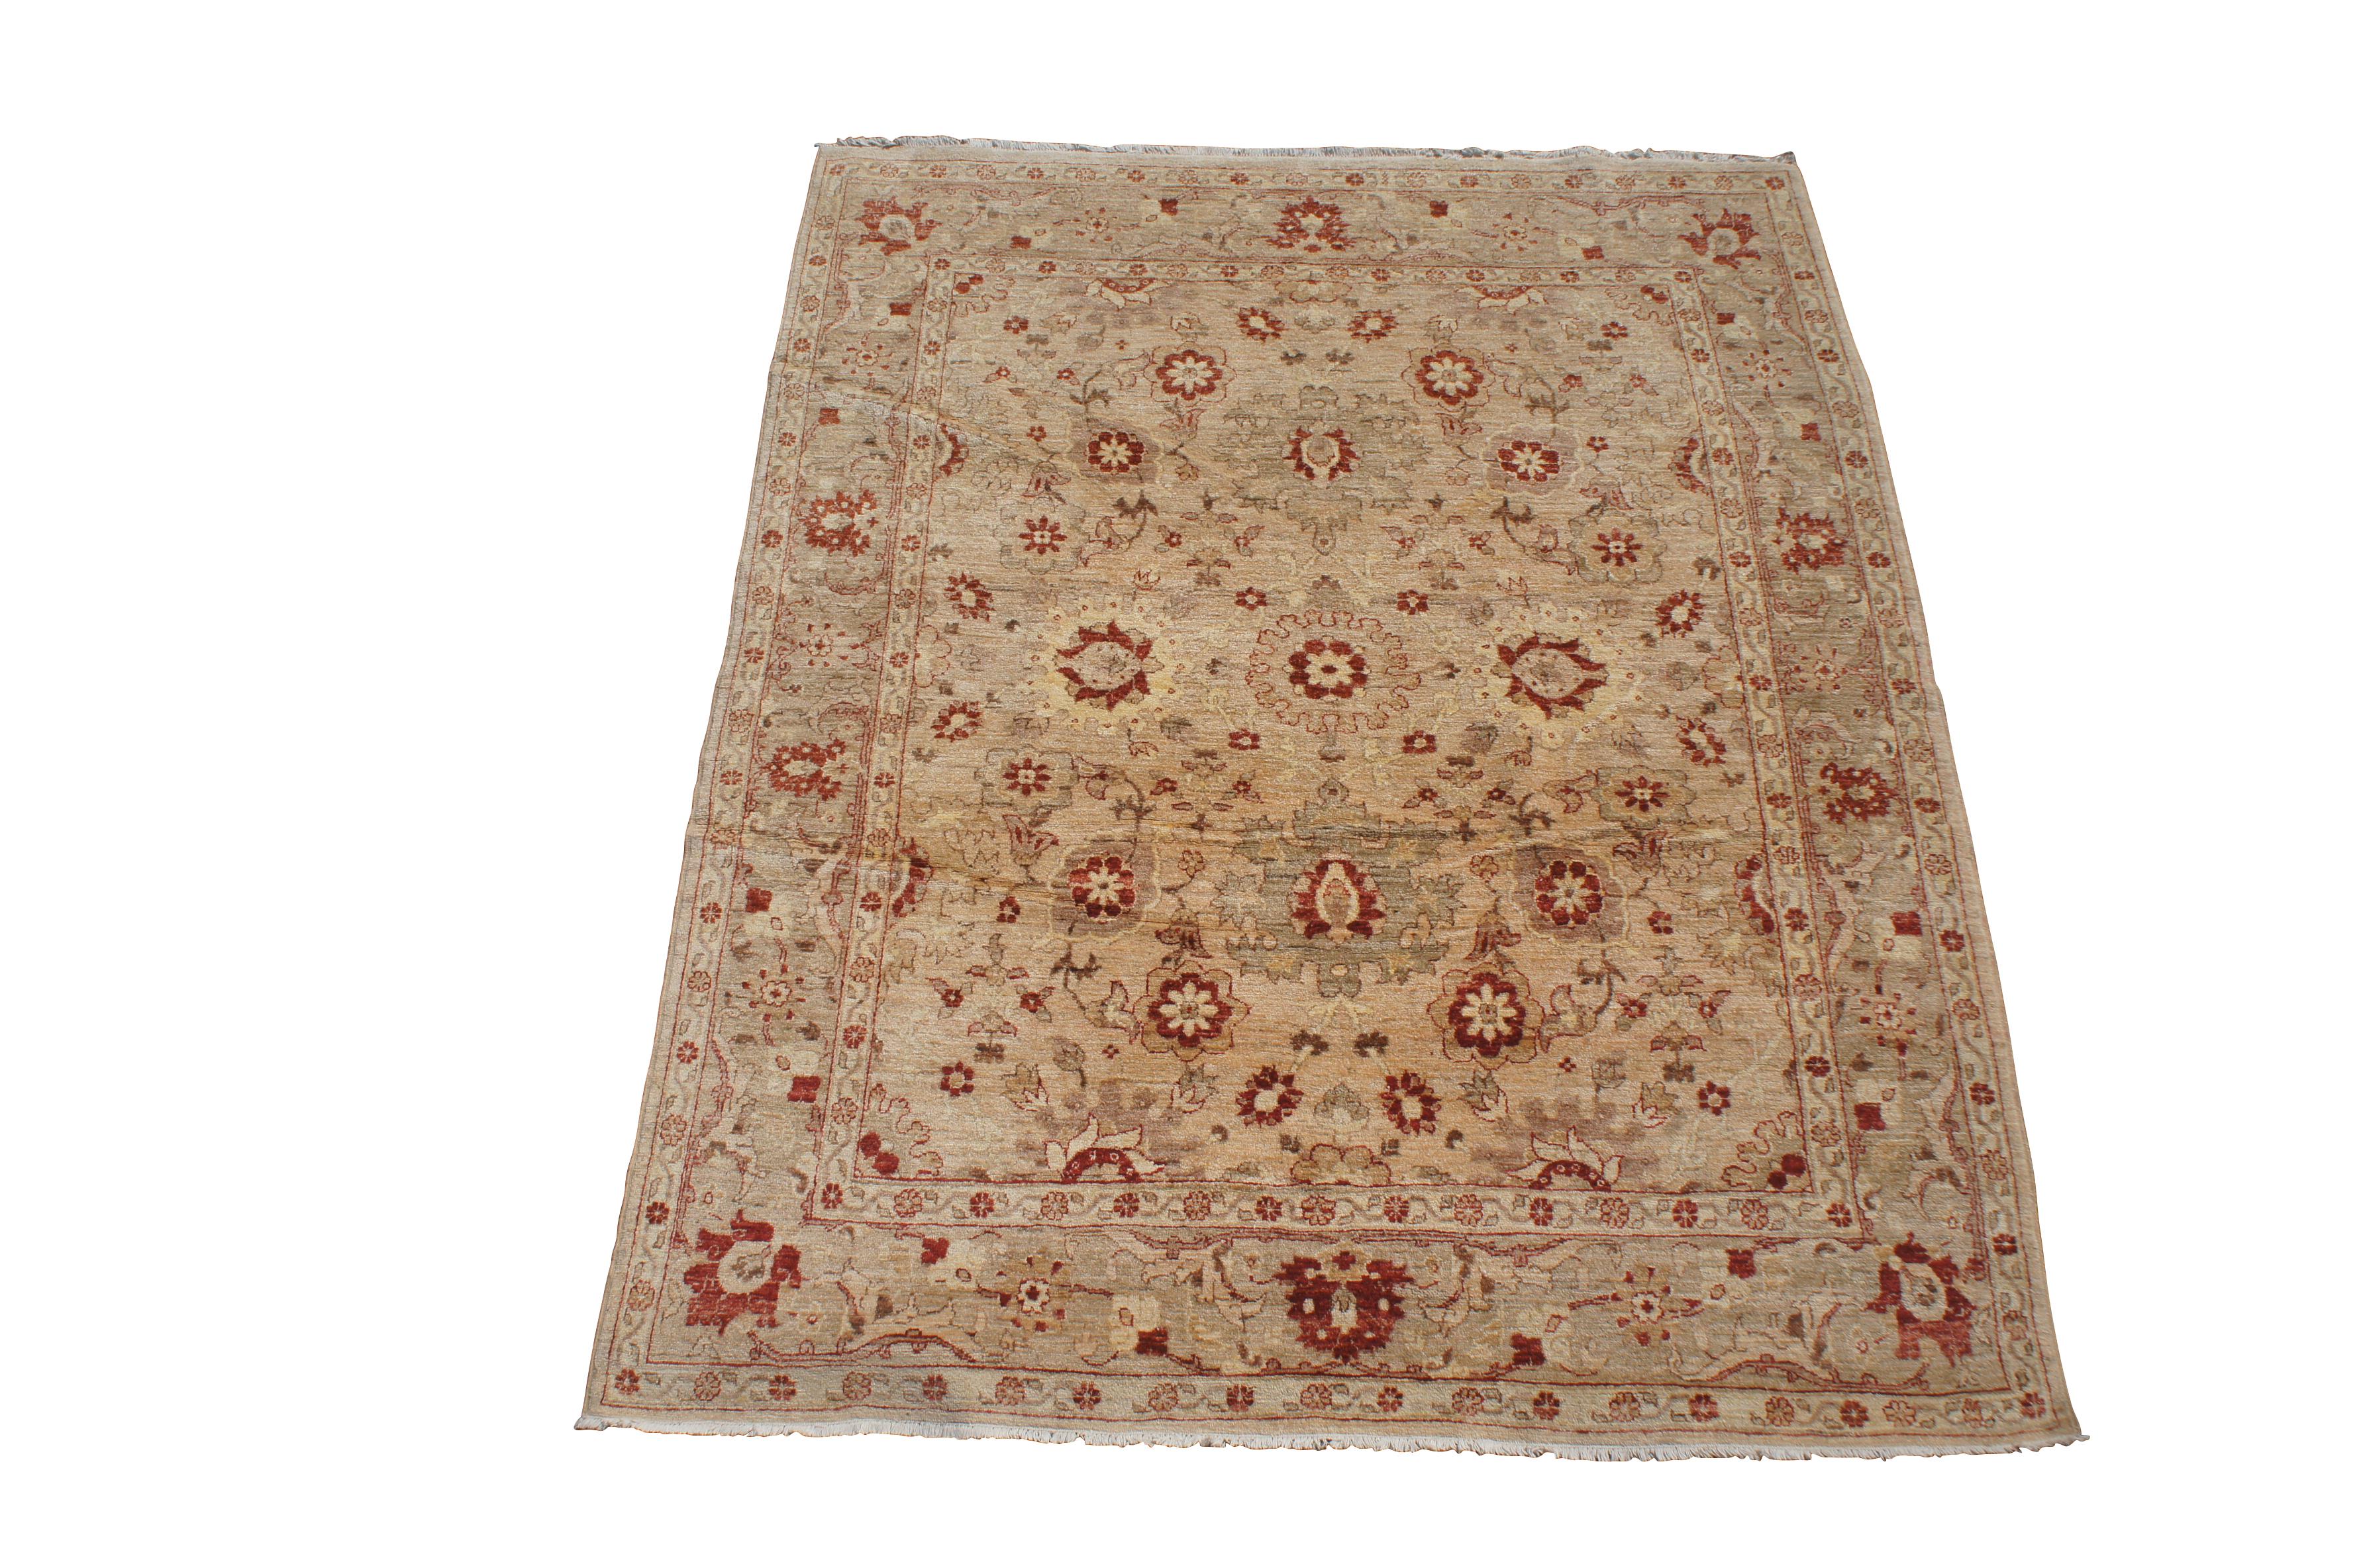 Vintage red & beige floral all over rug. Features a vibrant geometric design.  225 knots per square inch

Peshawar rugs are handmade rugs from northwestern Pakistan. They are also known as Ghazni rugs or Chobi rugs. 
 Peshawar rugs are durable, take